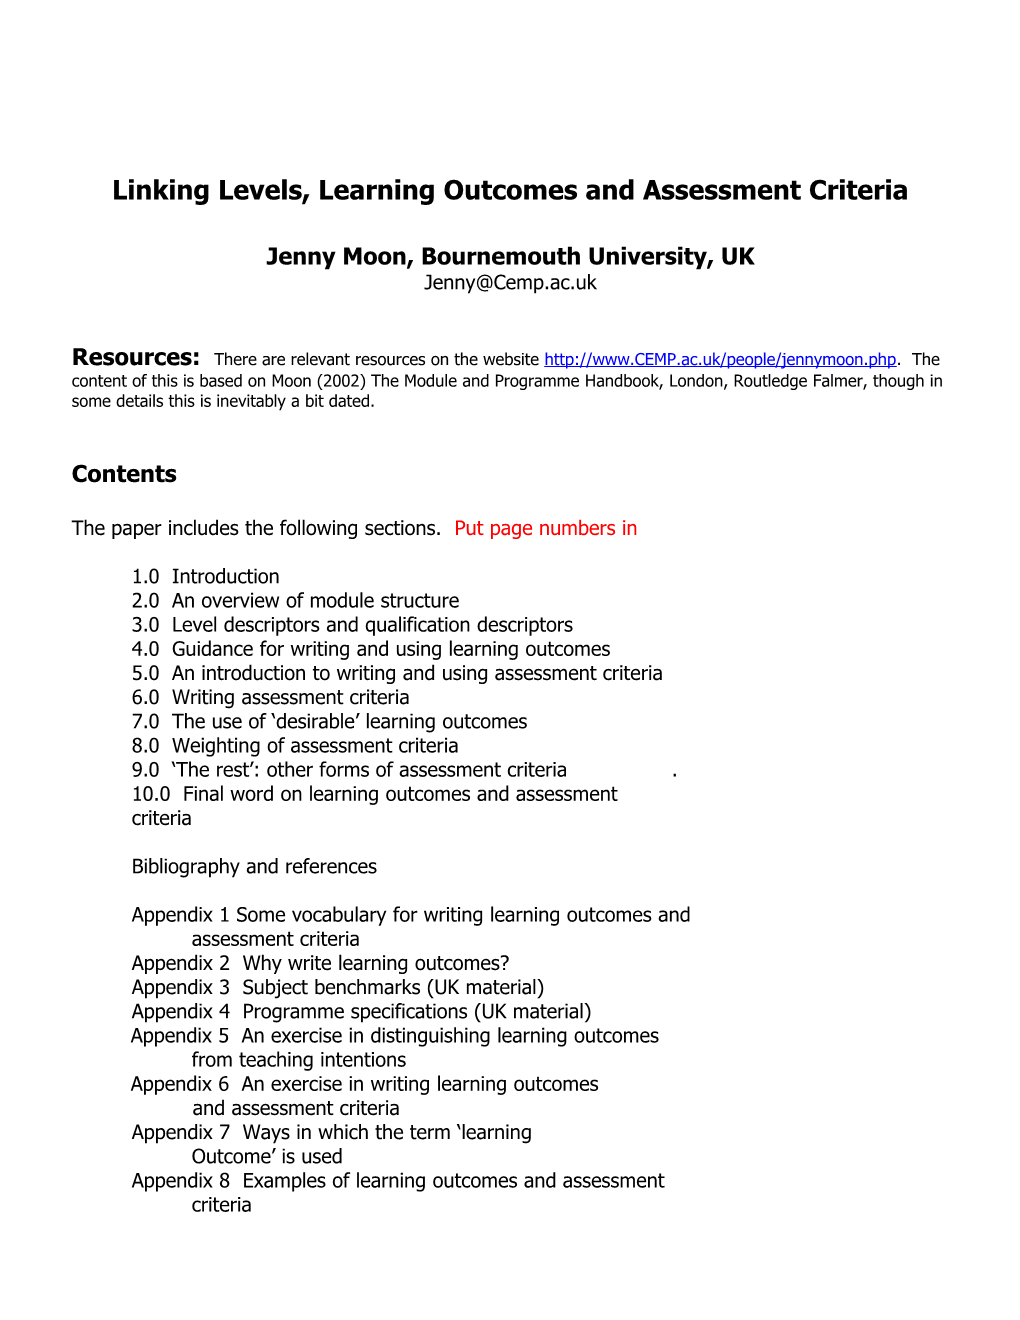 Linking Levels, Learning Outcomes and Assessment Criteria